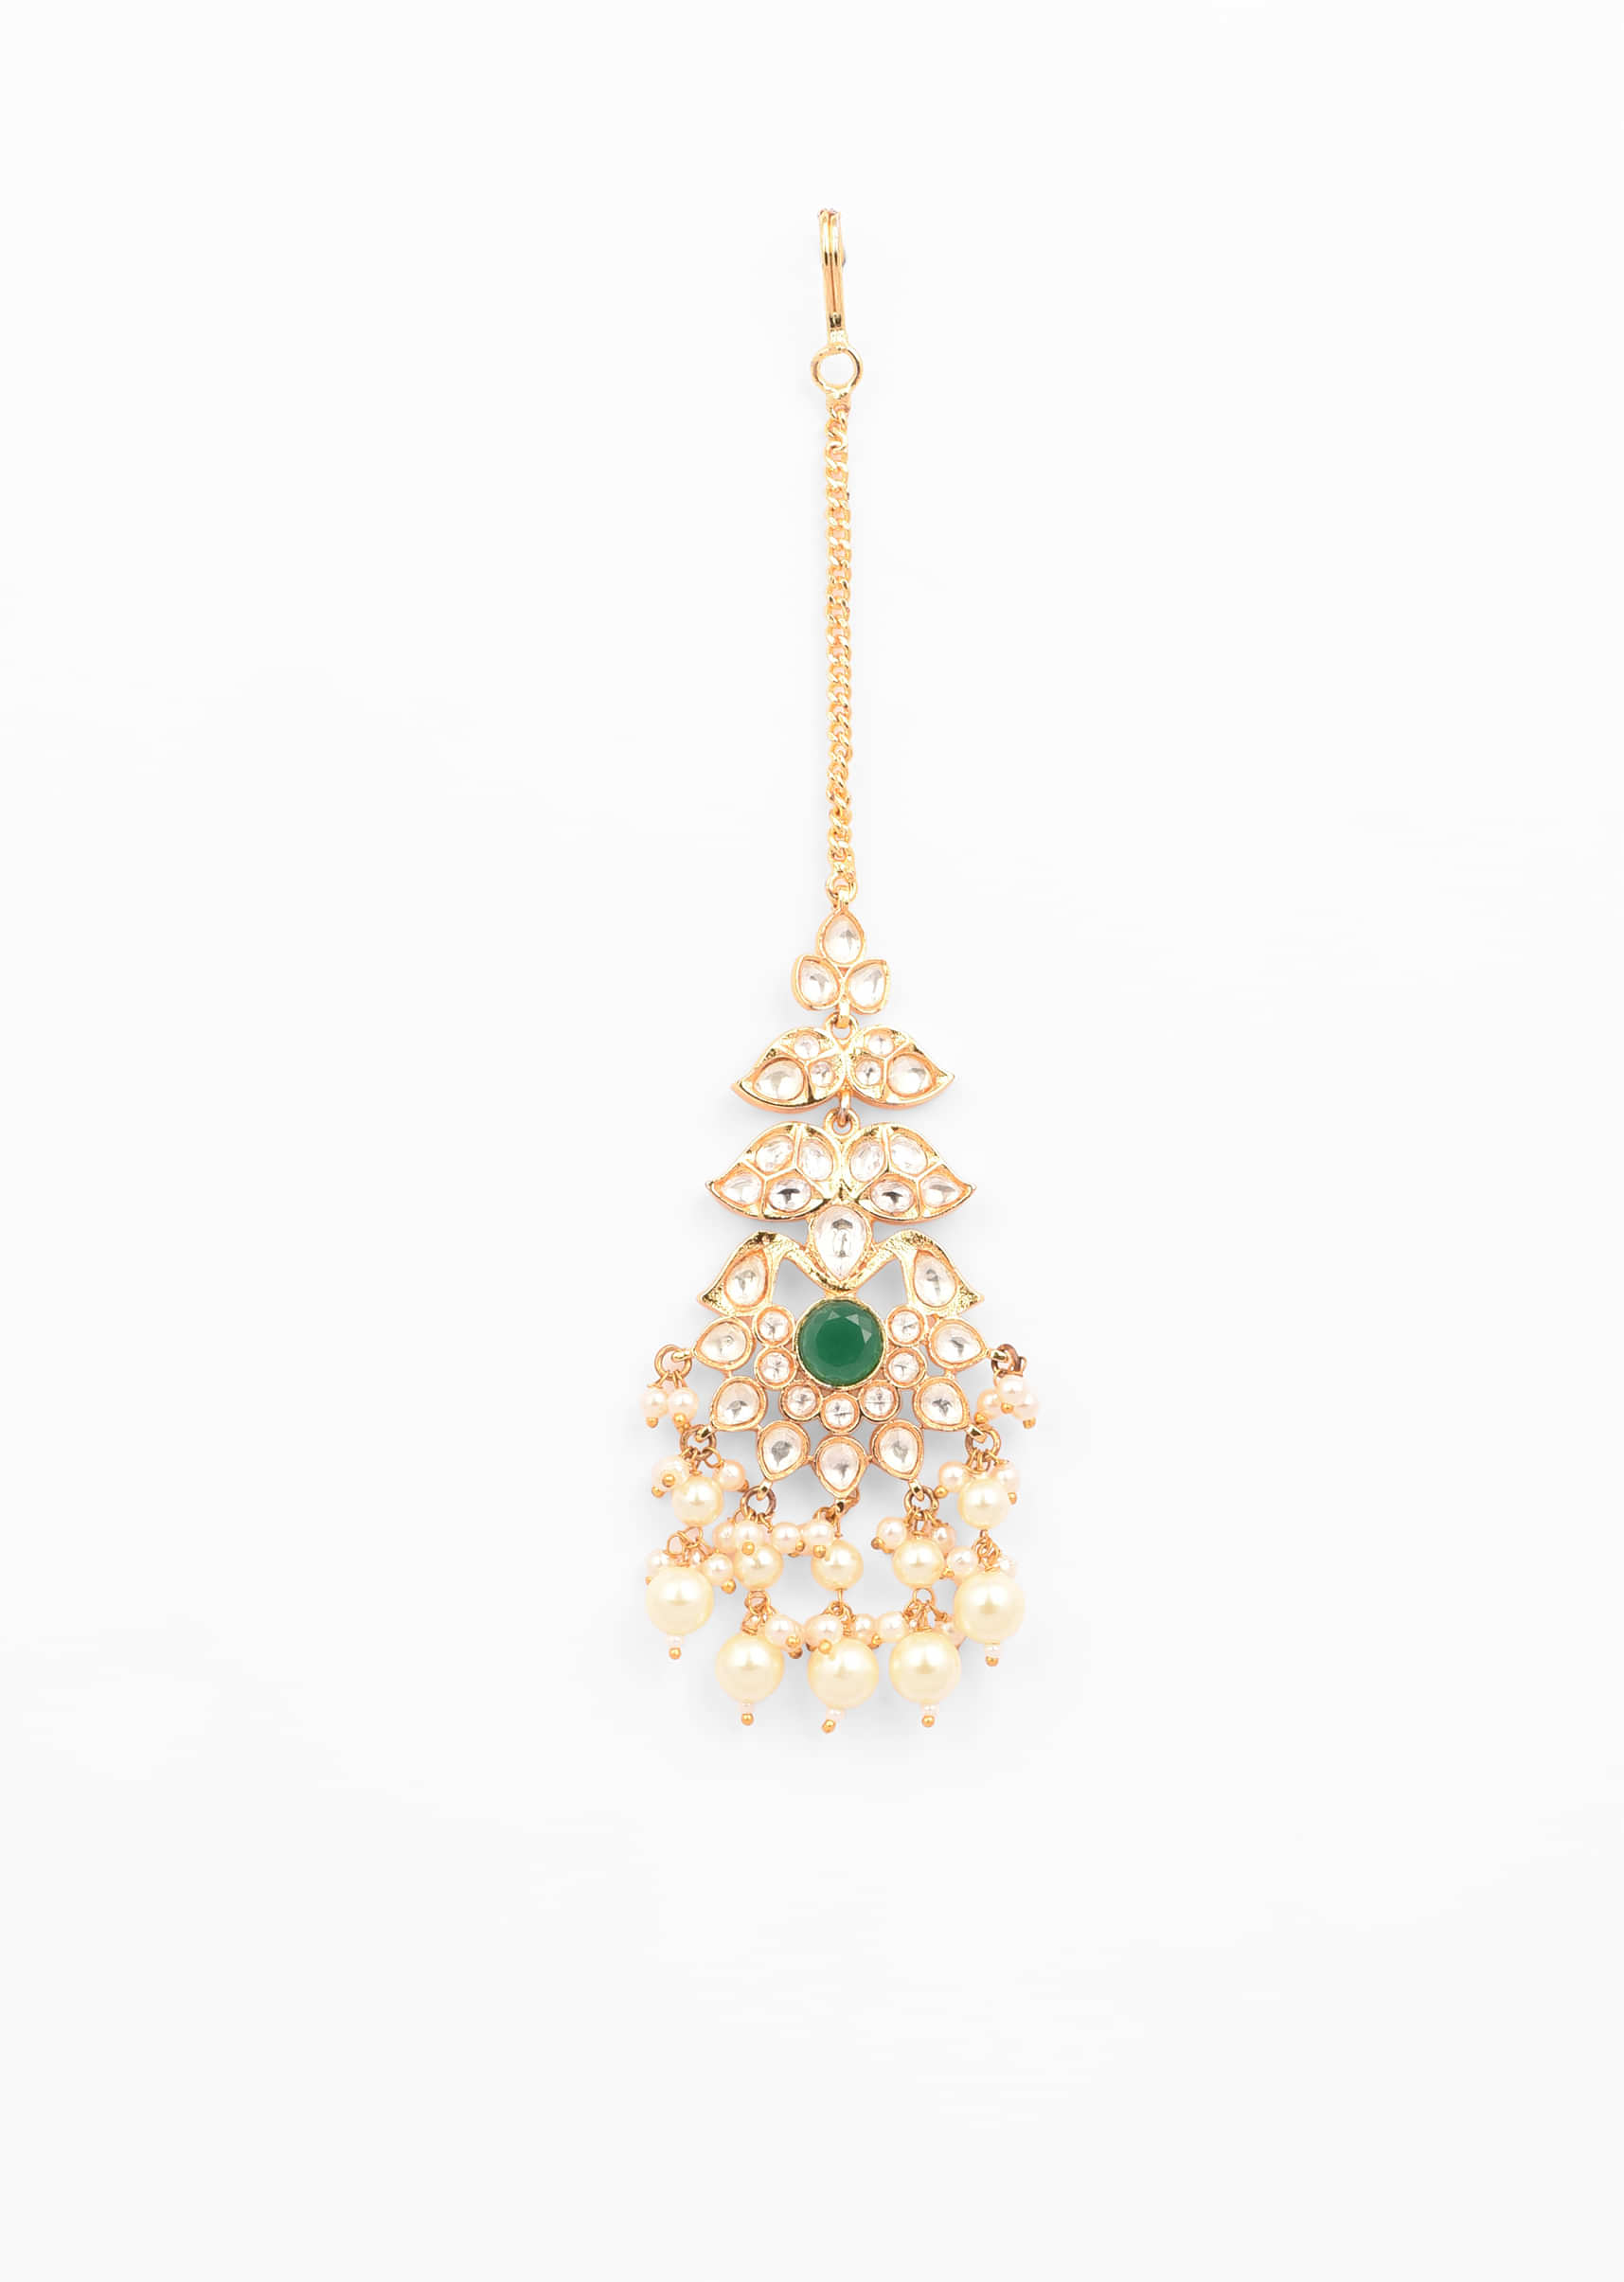 Gold Plated Mangtika With Floral, Green Stone Accent And Pearls 